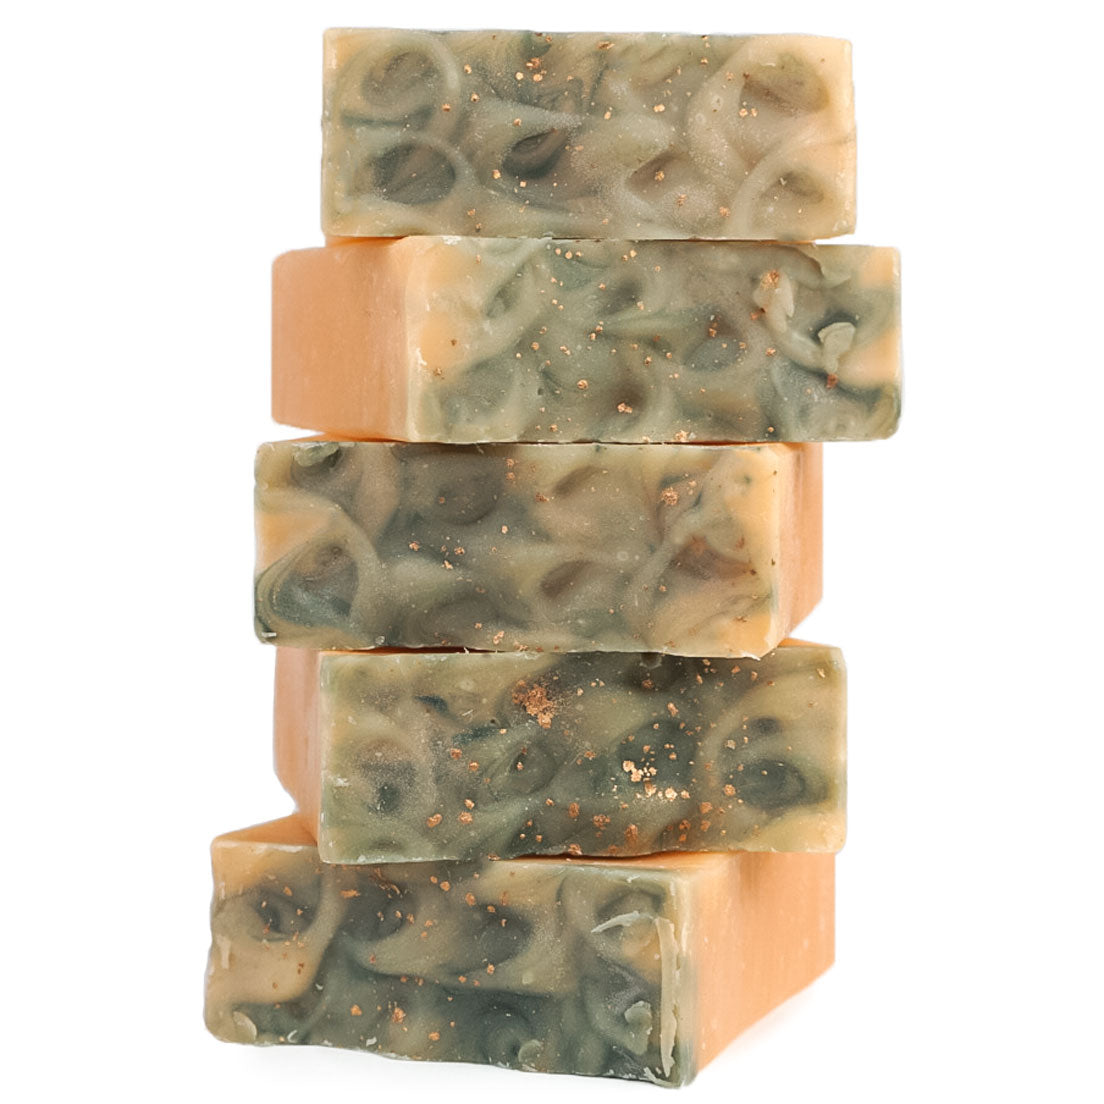 Load image into Gallery viewer, Launching small business, soap, cold process soap, handmade soap, natural soap, natural skincare, small business, organic soap, organic, bath, deodorant, bathing soap, soap bar, best handmade soap website, handmade soap bars, best handmade soap companies
